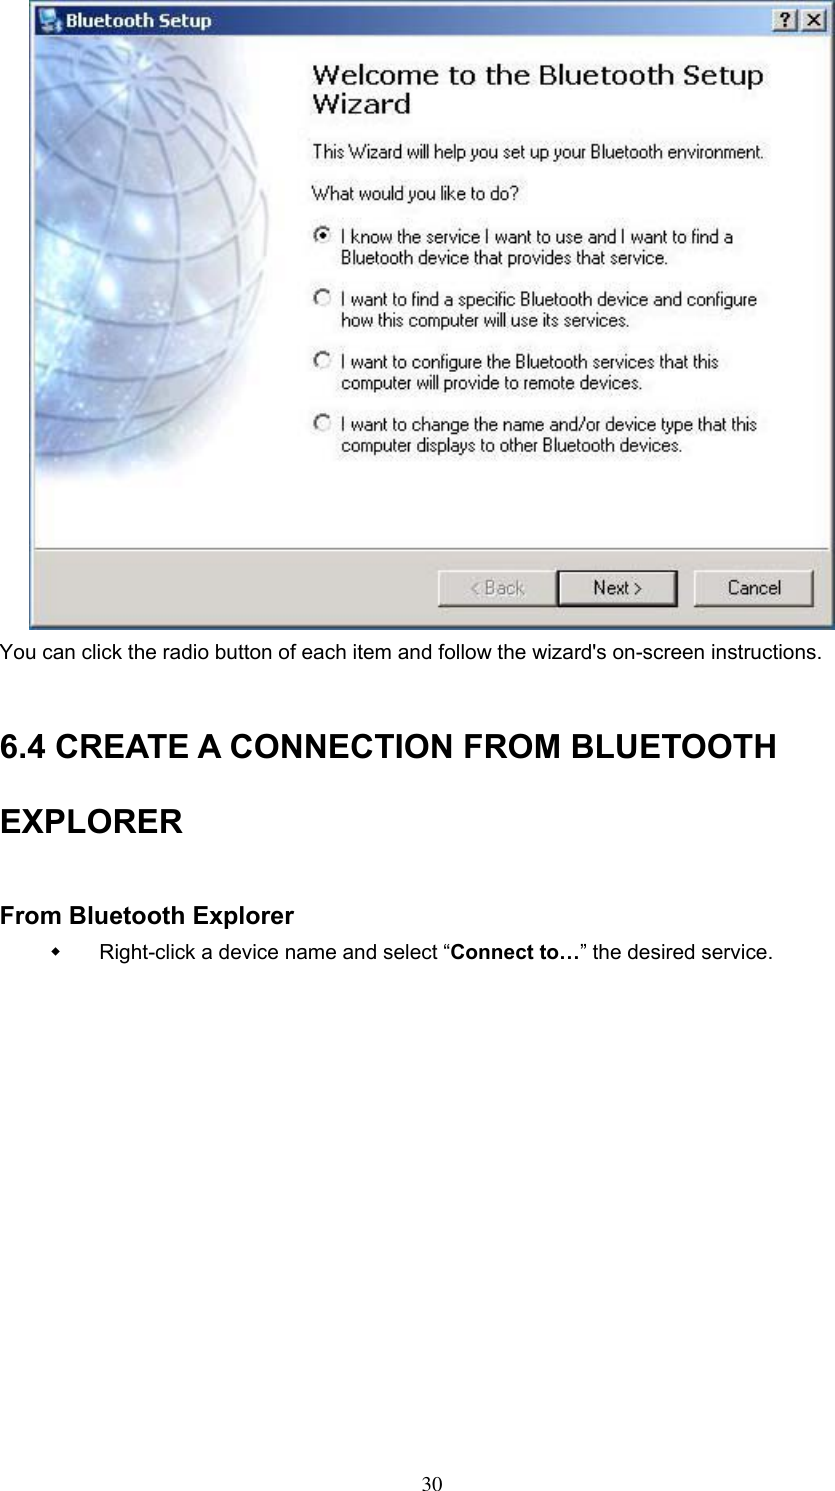  You can click the radio button of each item and follow the wizard&apos;s on-screen instructions.  6.4 CREATE A CONNECTION FROM BLUETOOTH EXPLORER  From Bluetooth Explorer   Right-click a device name and select “Connect to…” the desired service.   30 